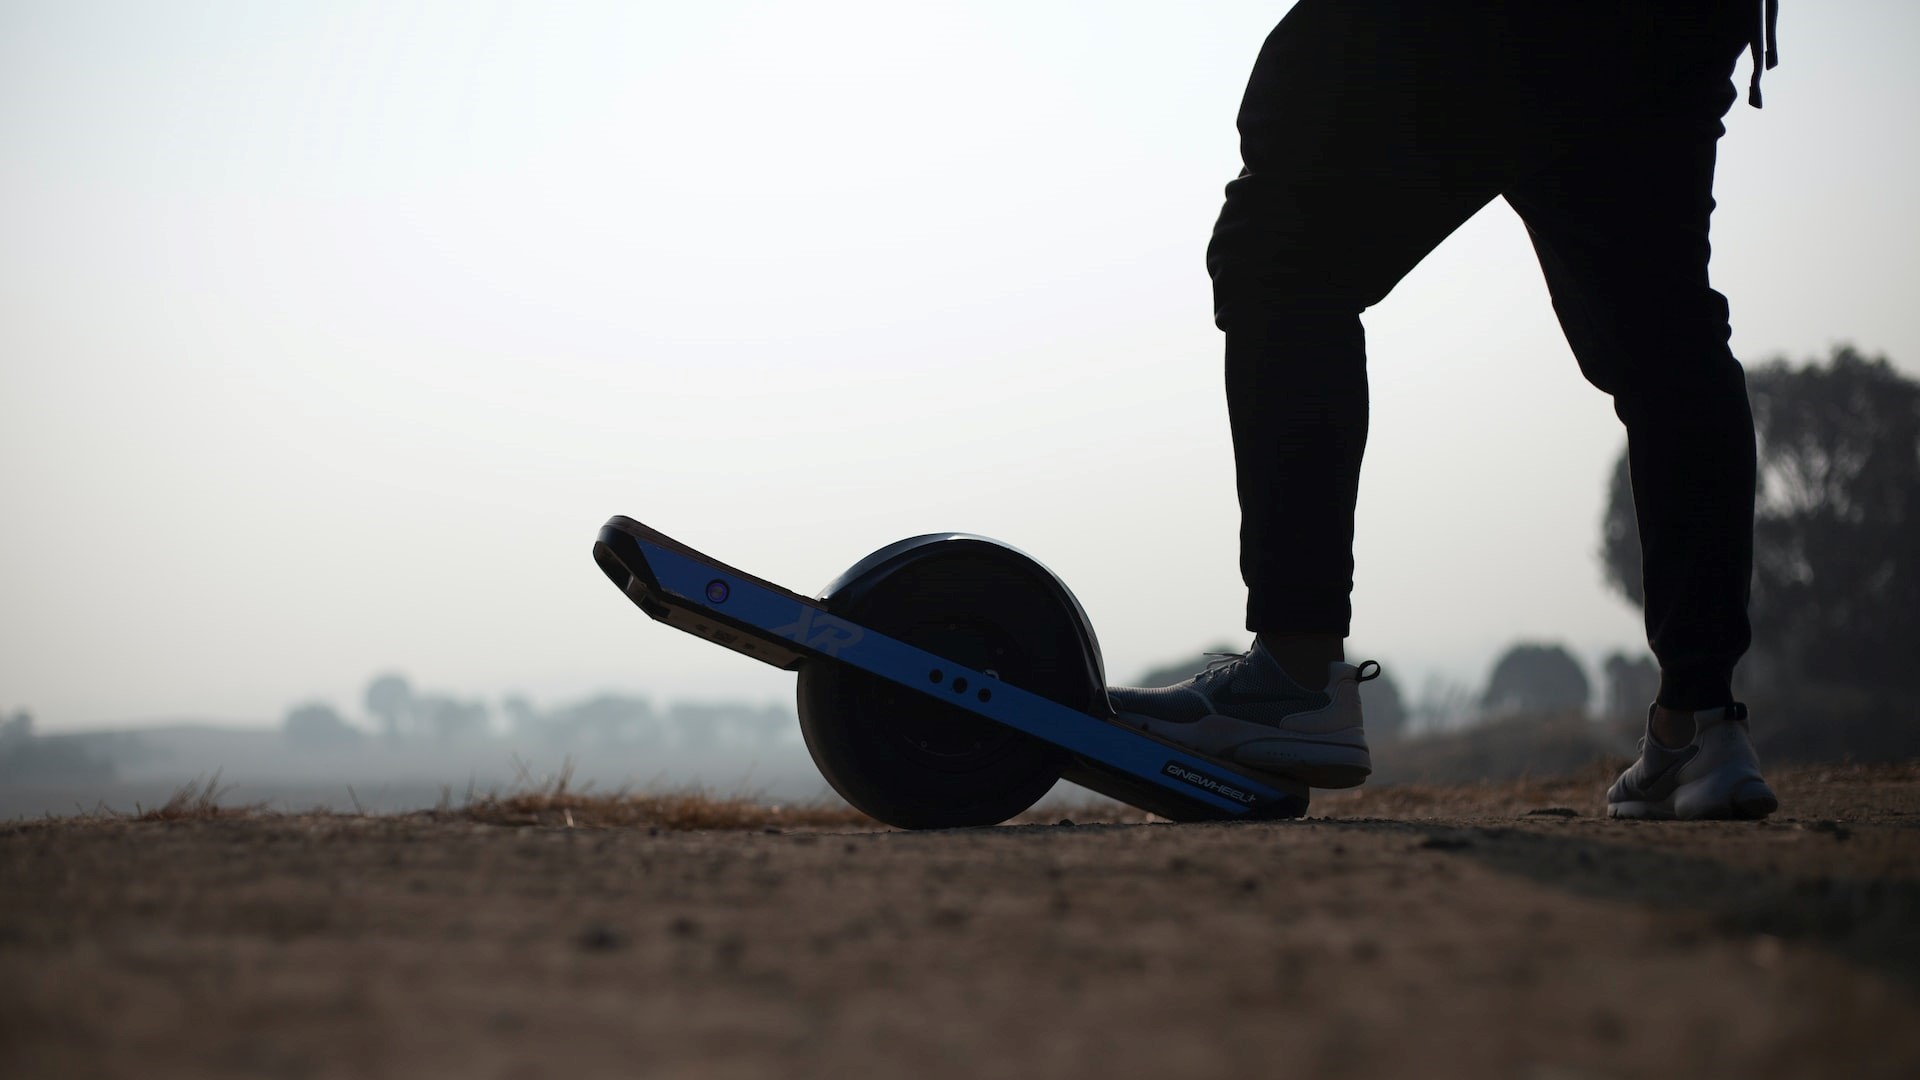 8 Best Shoes for Onewheel – TOP PICKS